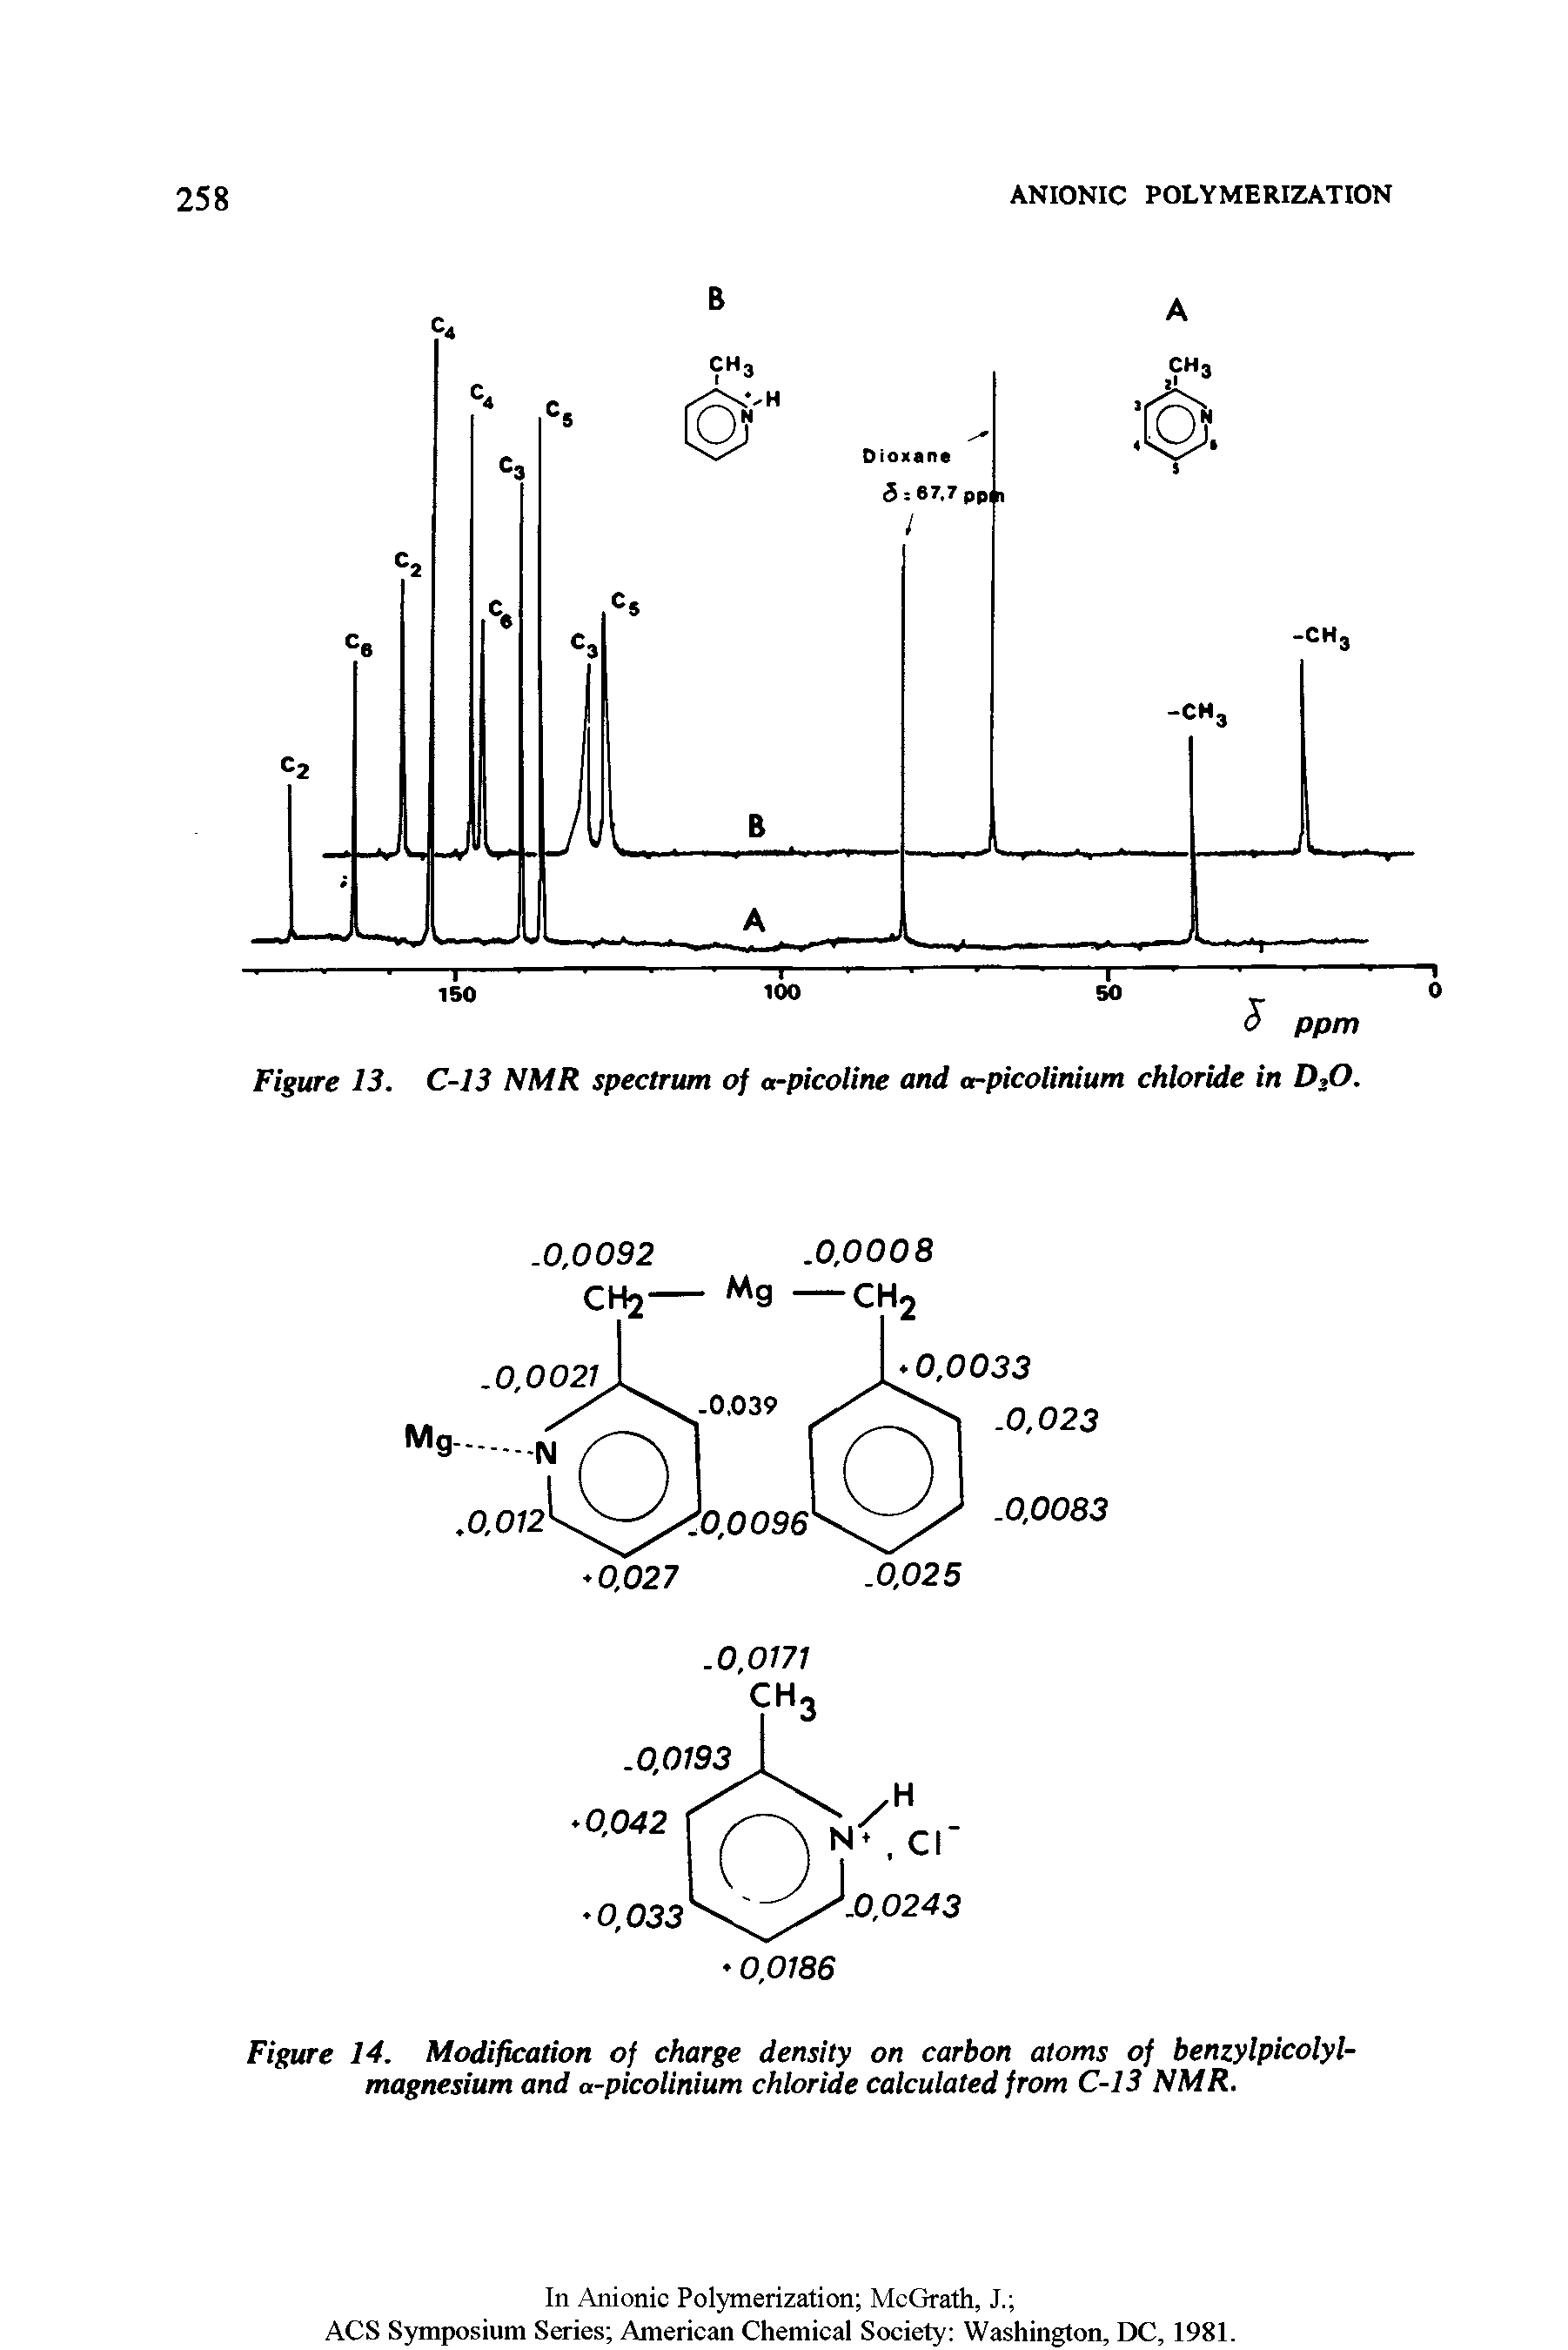 Figure 14. Modification of charge density on carbon atoms of benzylpicolyl-magnesium and a-picolinium chloride calculated from C-13 NMR.